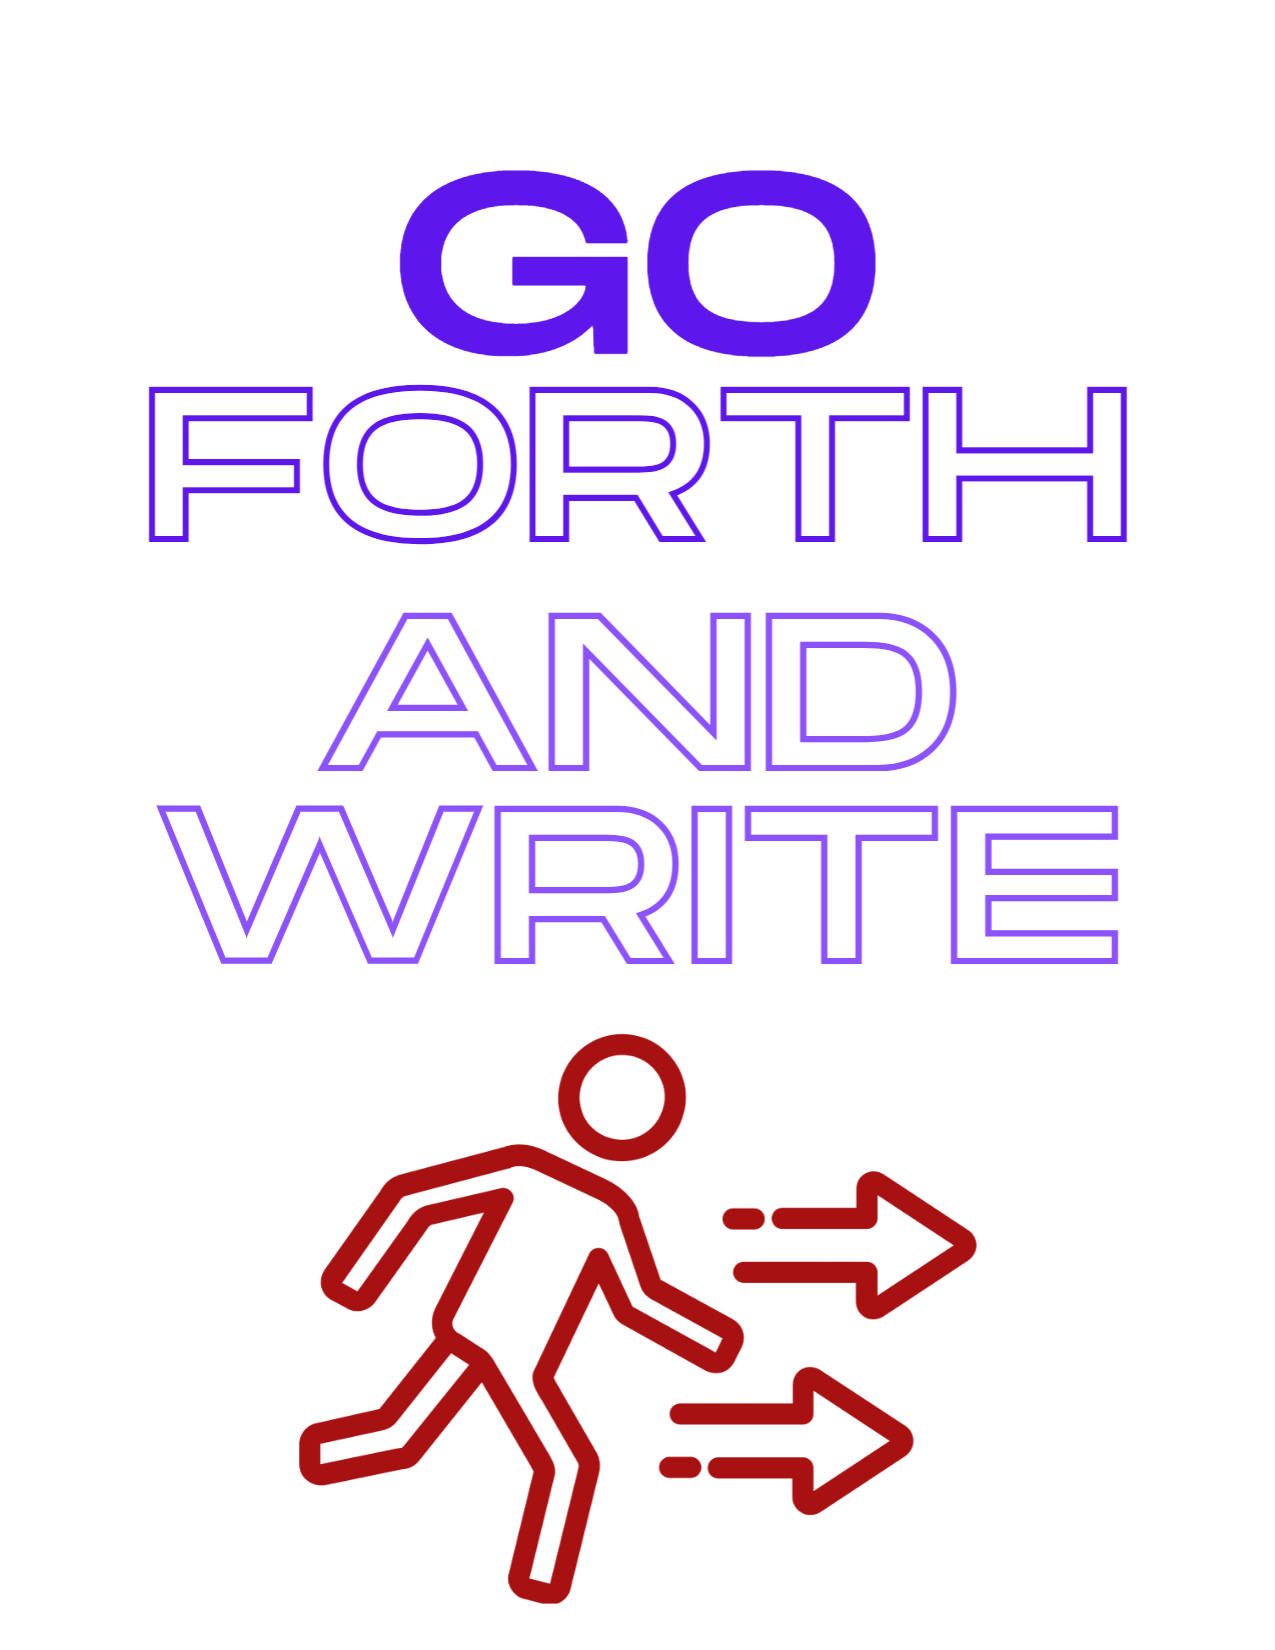 Go forth and write!